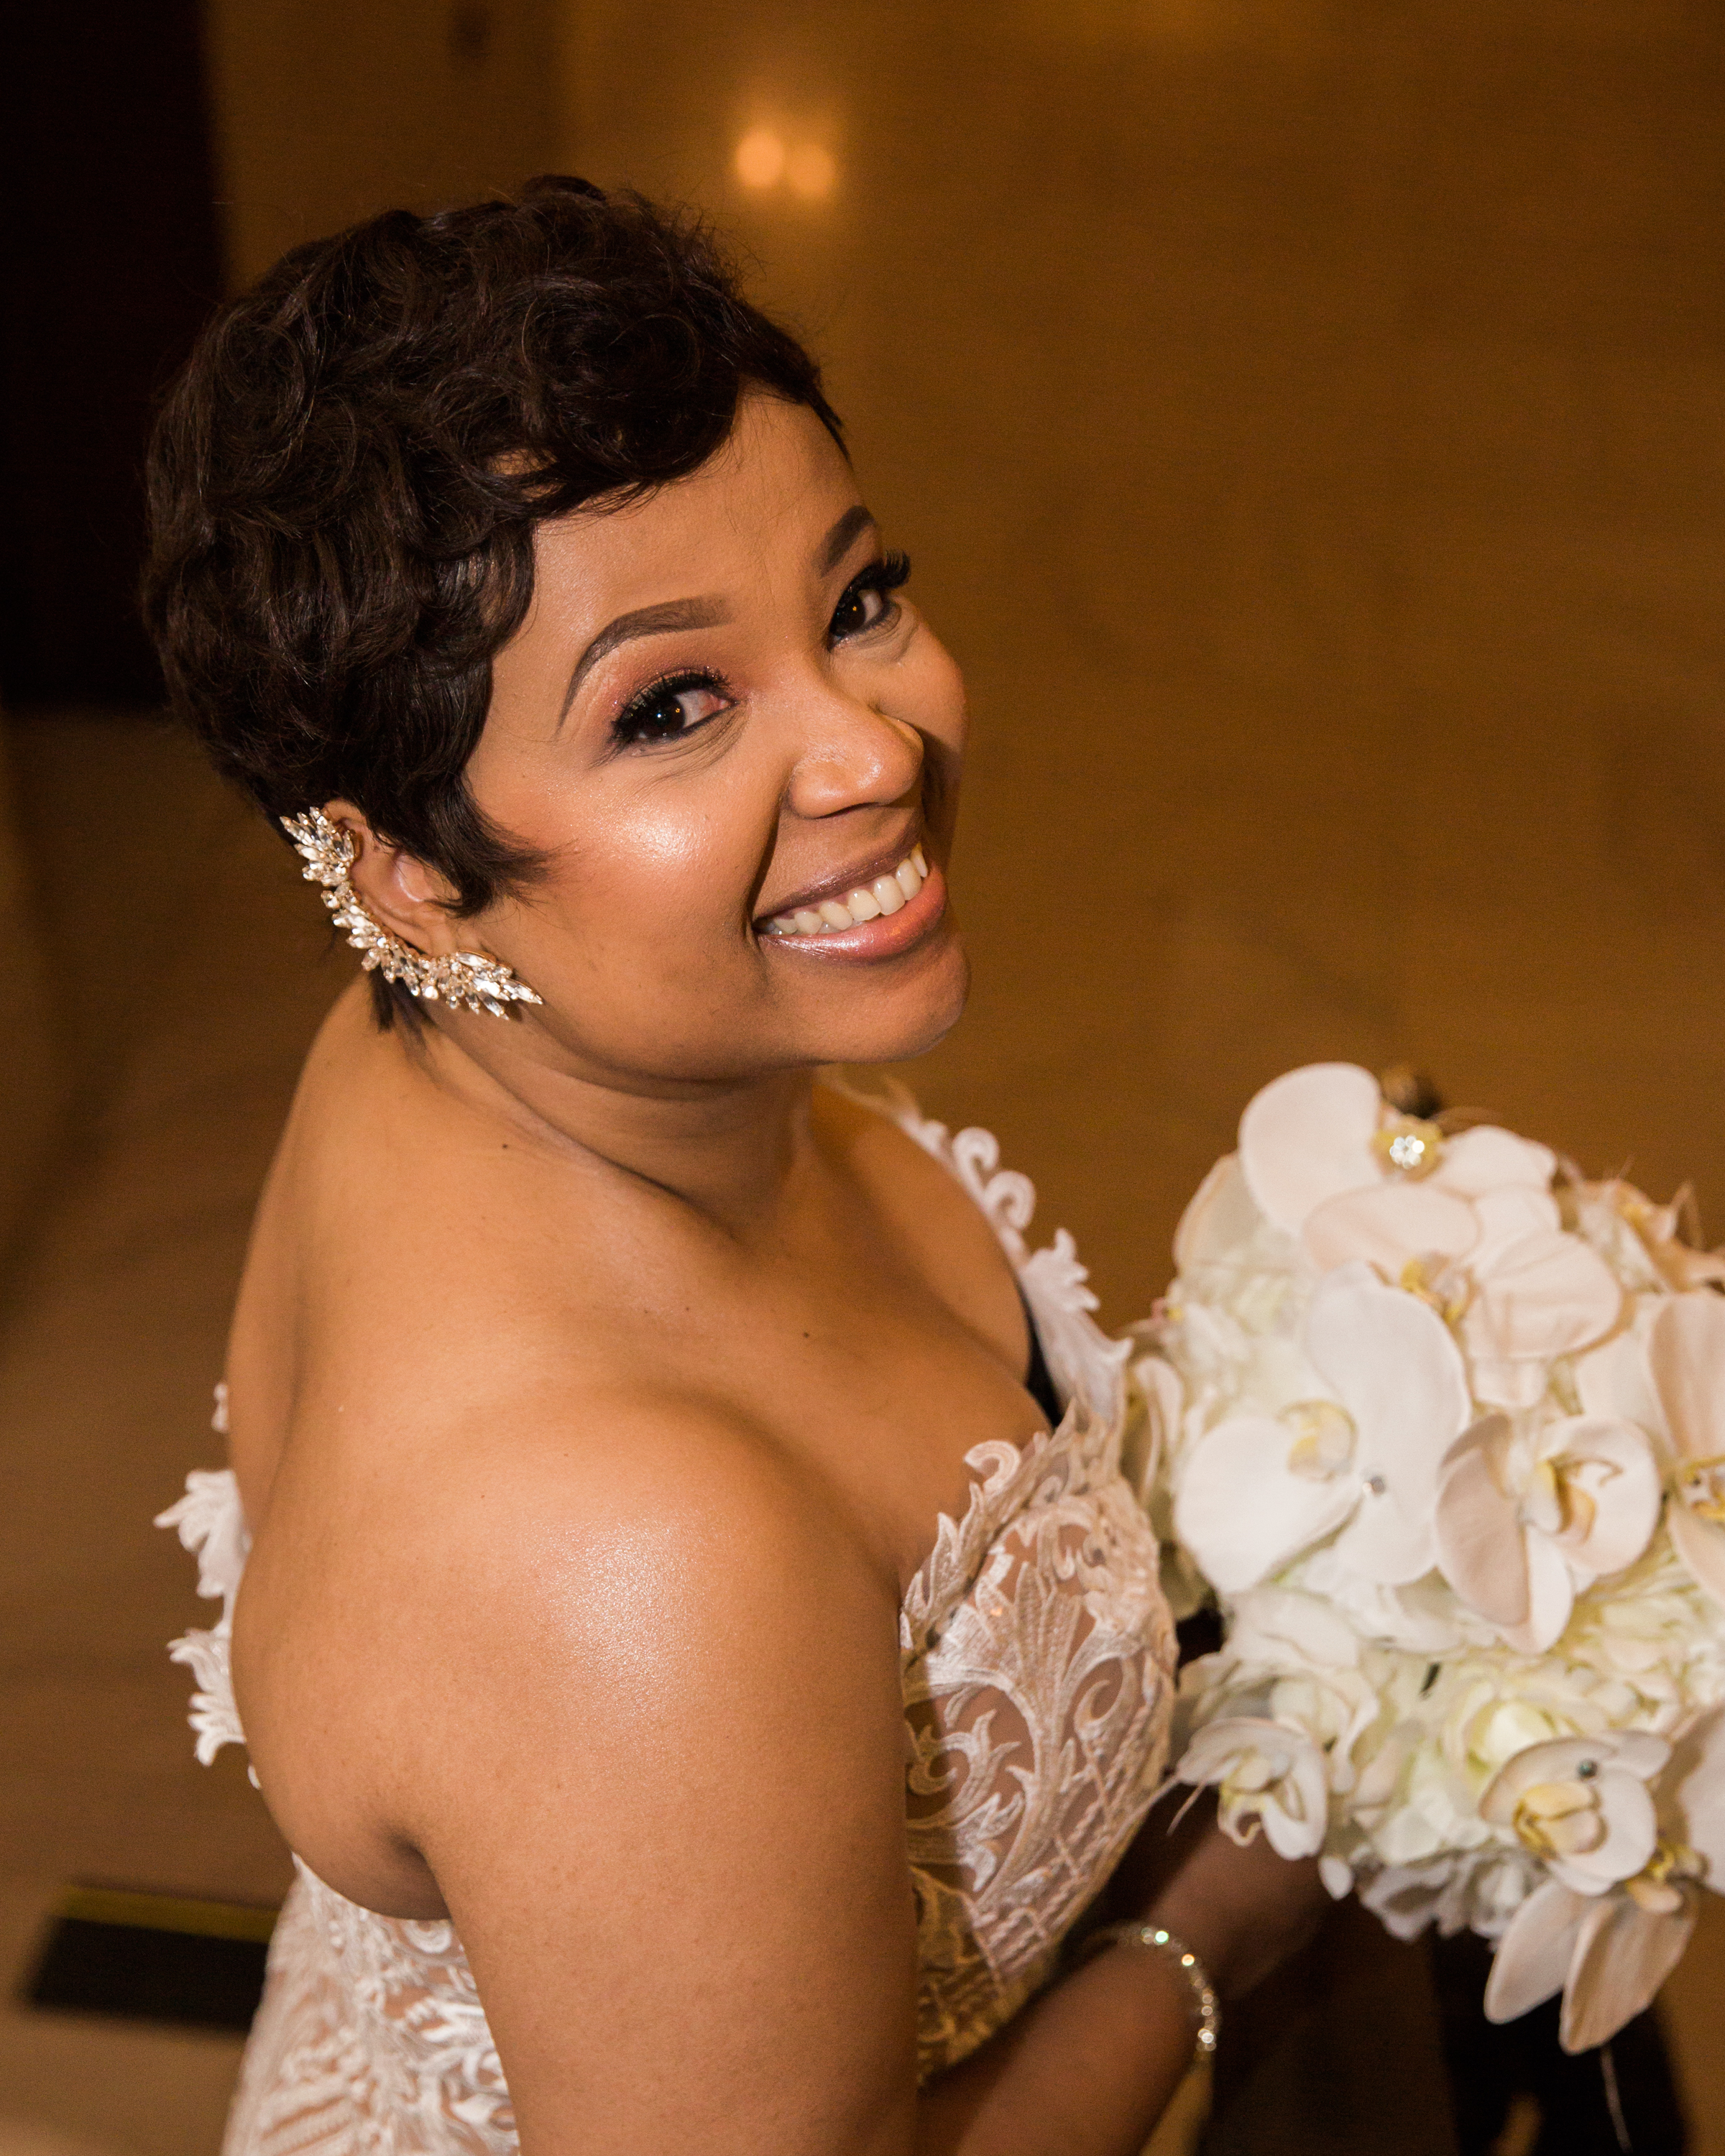 Best Classic Black Bride at The Grand Baltimore Maryland Husband and Wife Wedding Photographers Megapixels Media (60 of 98).jpg